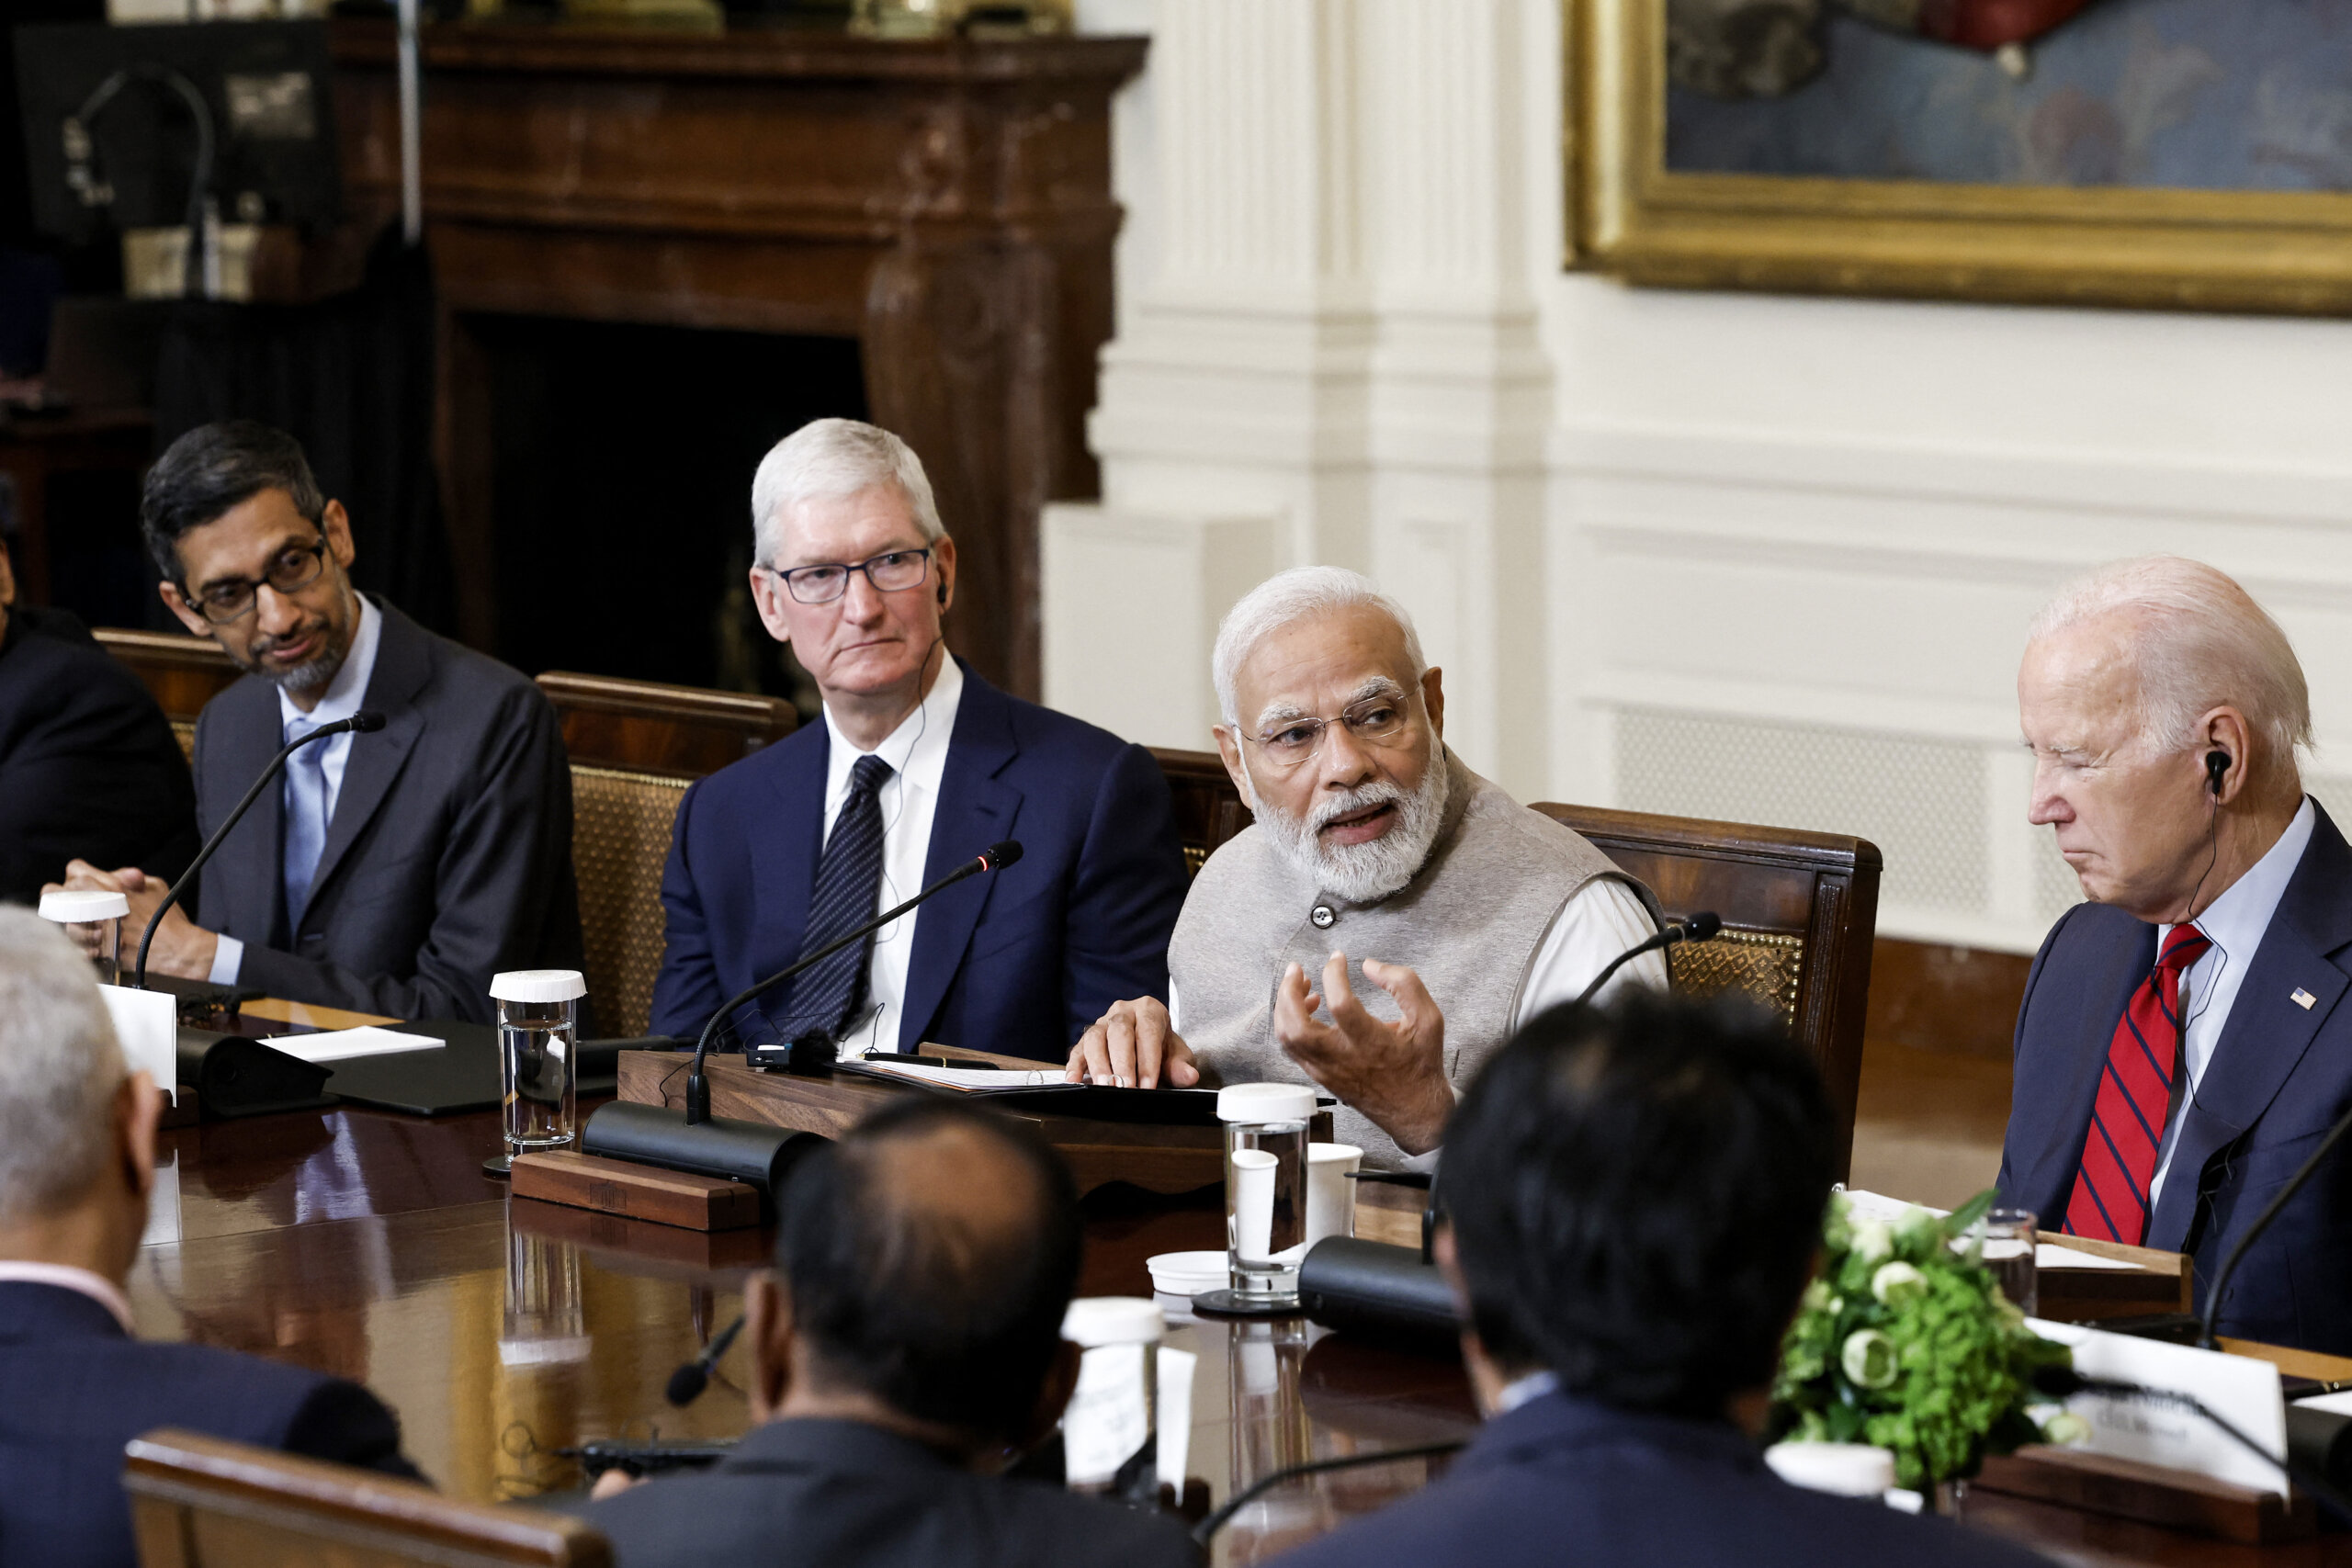 WASHINGTON, DC - JUNE 23: Indian Prime Minister Narendra Modi speaks during a roundtable with American and Indian business leaders alongside U.S. President Joe Biden in the East Room of the White House on June 23, 2023 in Washington, DC. Biden and Modi held the meeting to meet with a range of leaders from the tech and business worlds and to discuss topics including innovation and AI. People in attendance included Google CEO Sundar Pichai (L) and Apple CEO Tim Cook (2nd from left). Anna Moneymaker/Getty Images/AFP (Photo by Anna Moneymaker / GETTY IMAGES NORTH AMERICA / Getty Images via AFP)